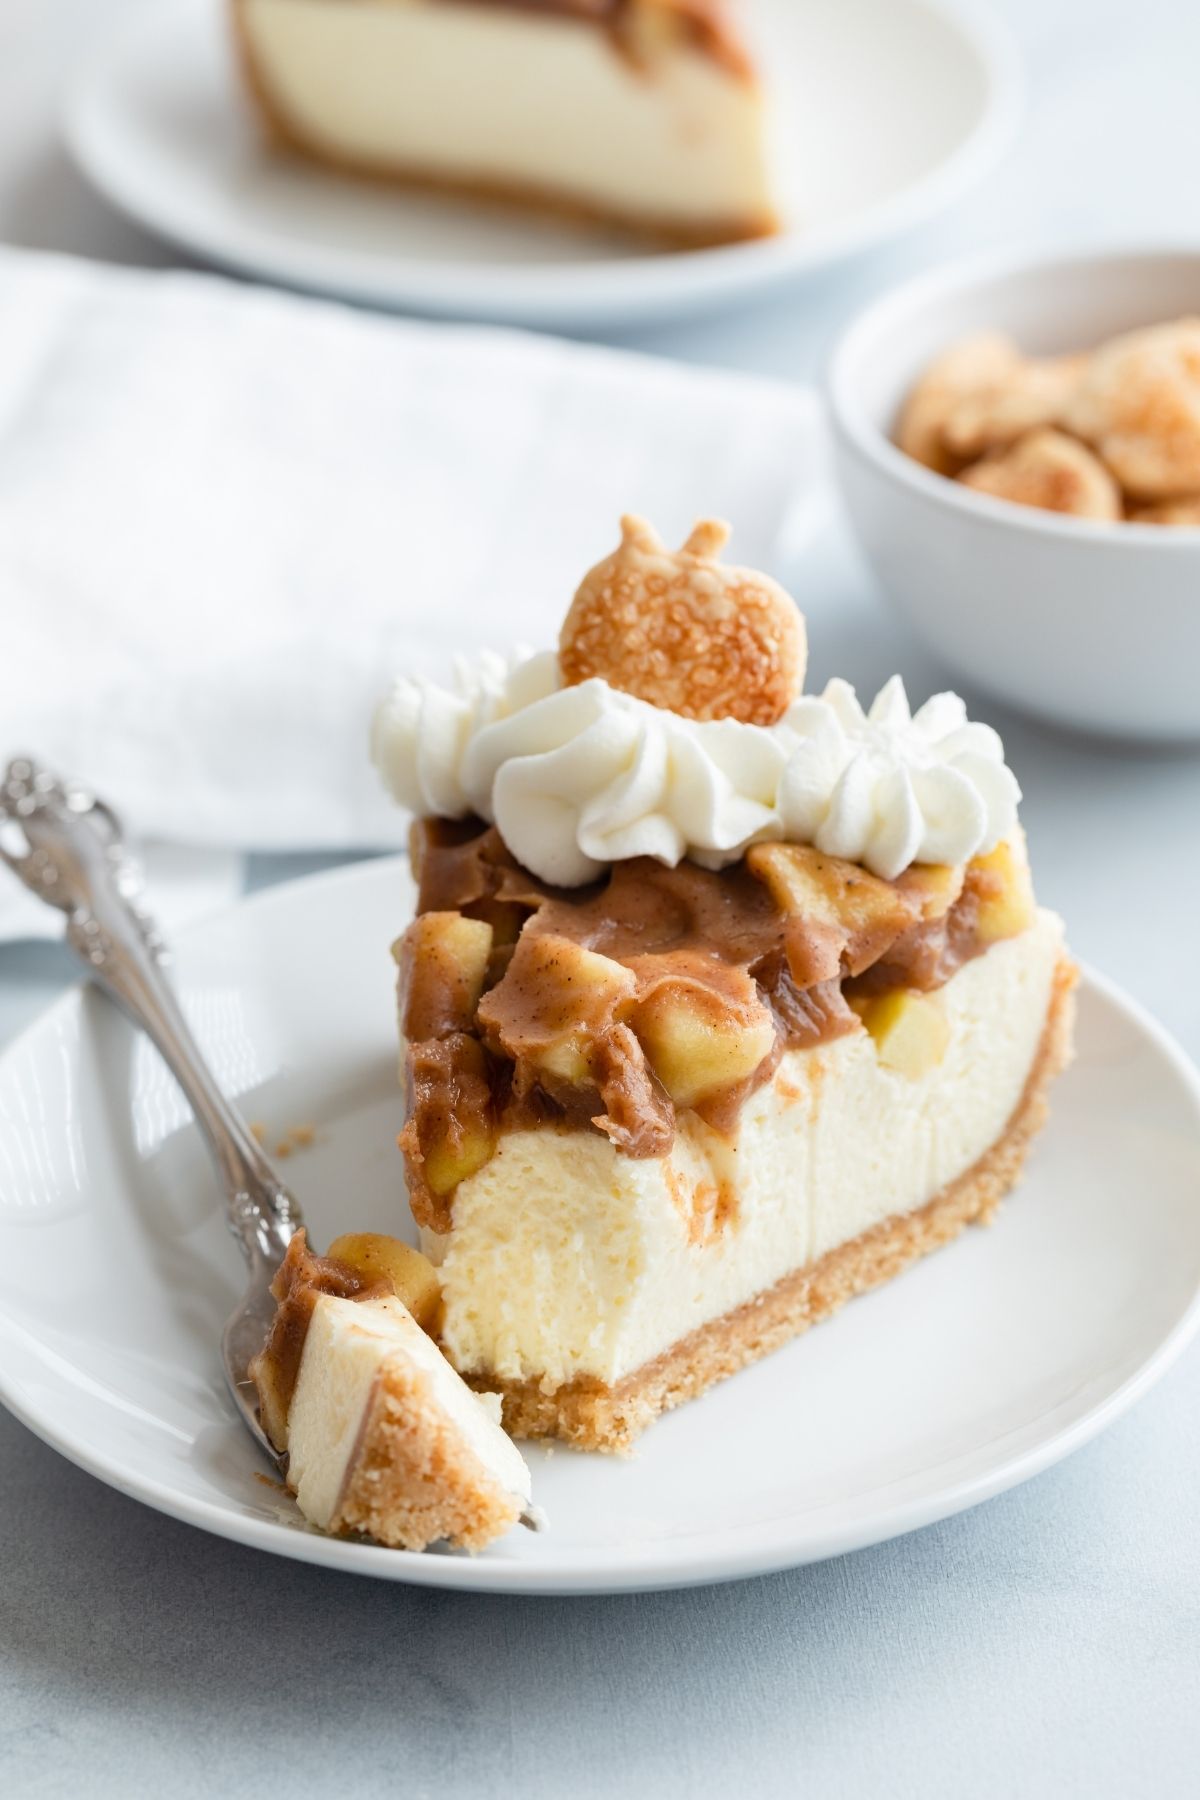 slice of apple pie cheesecake on white plate with fork taking a bite out